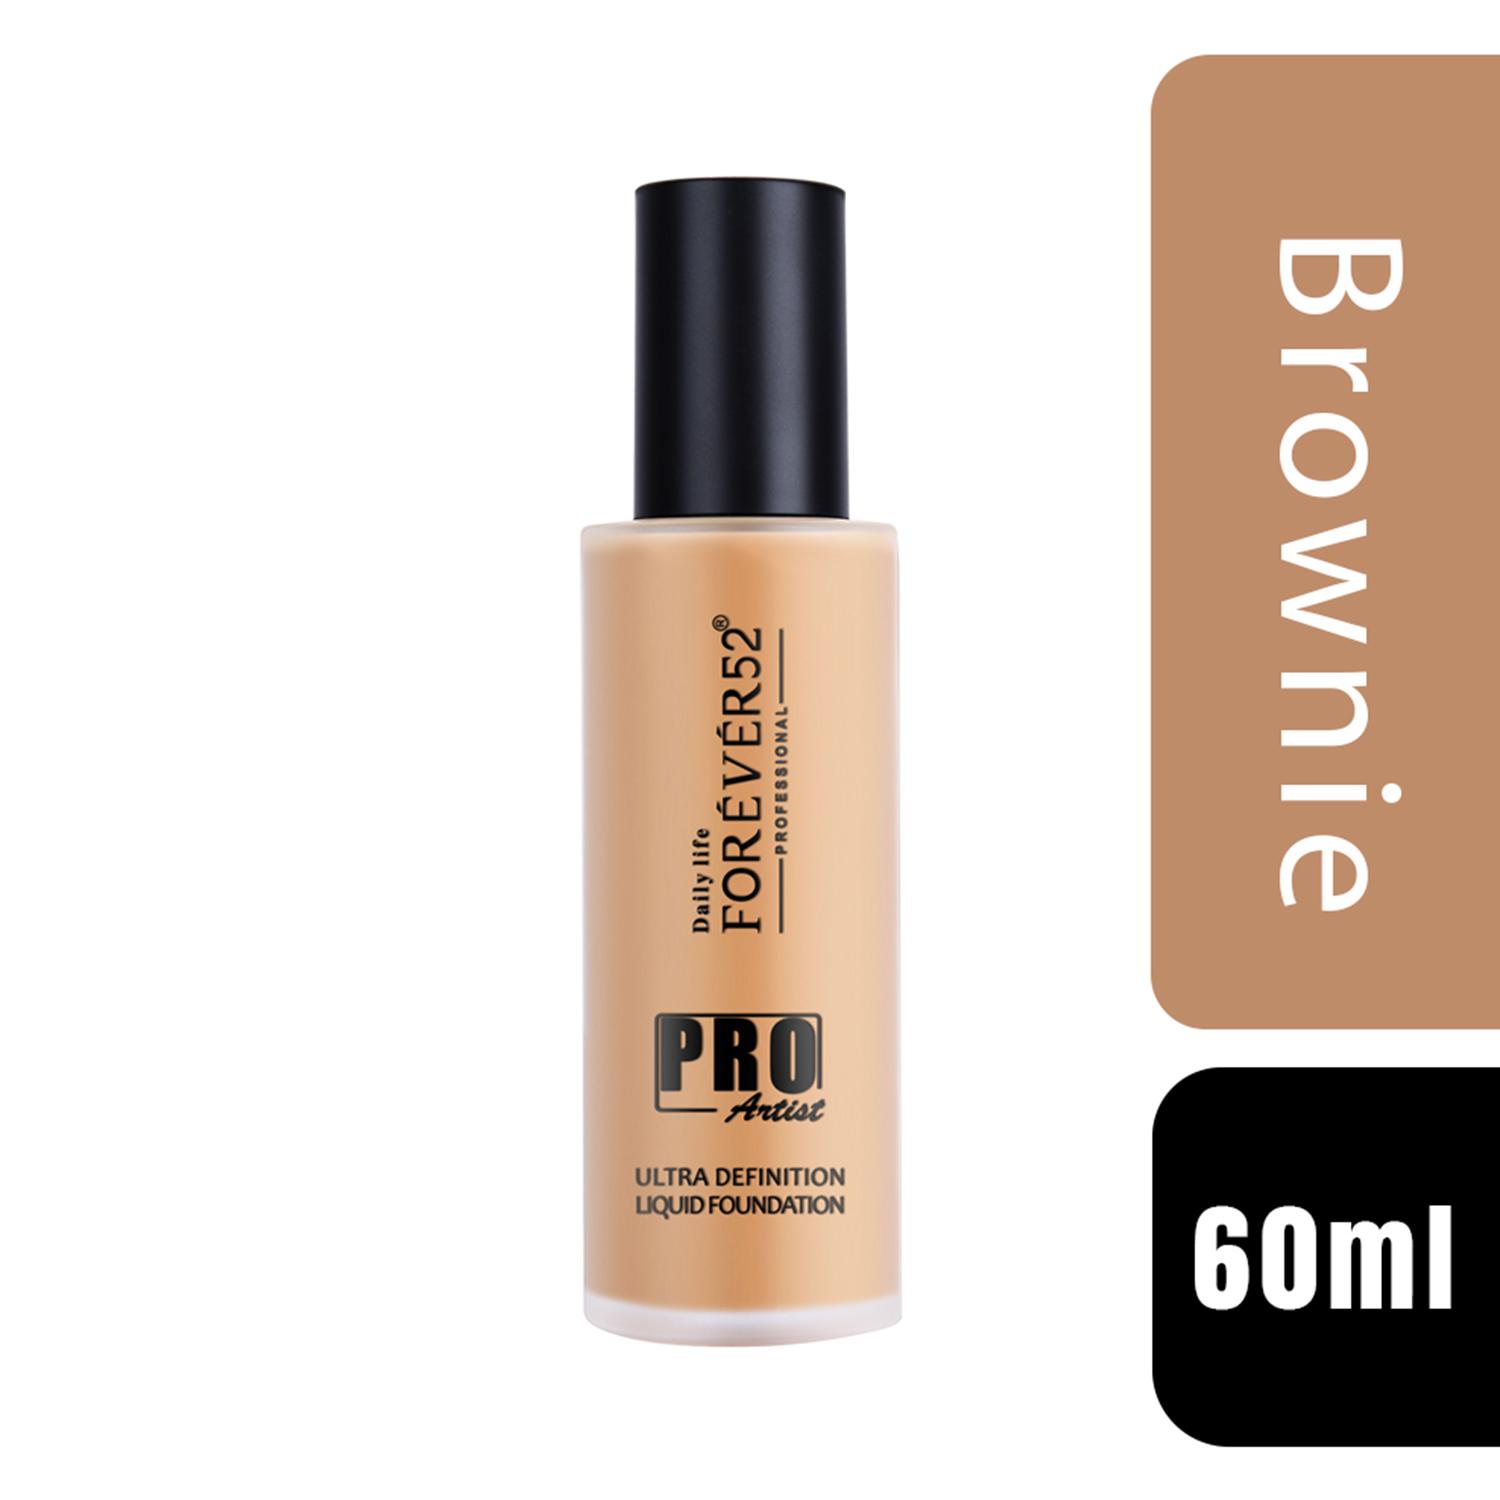 Daily Life Forever52 | Daily Life Forever52 Pro Artist Ultra Definition Liquid Foundation BUF012 - Brownie (60ml)